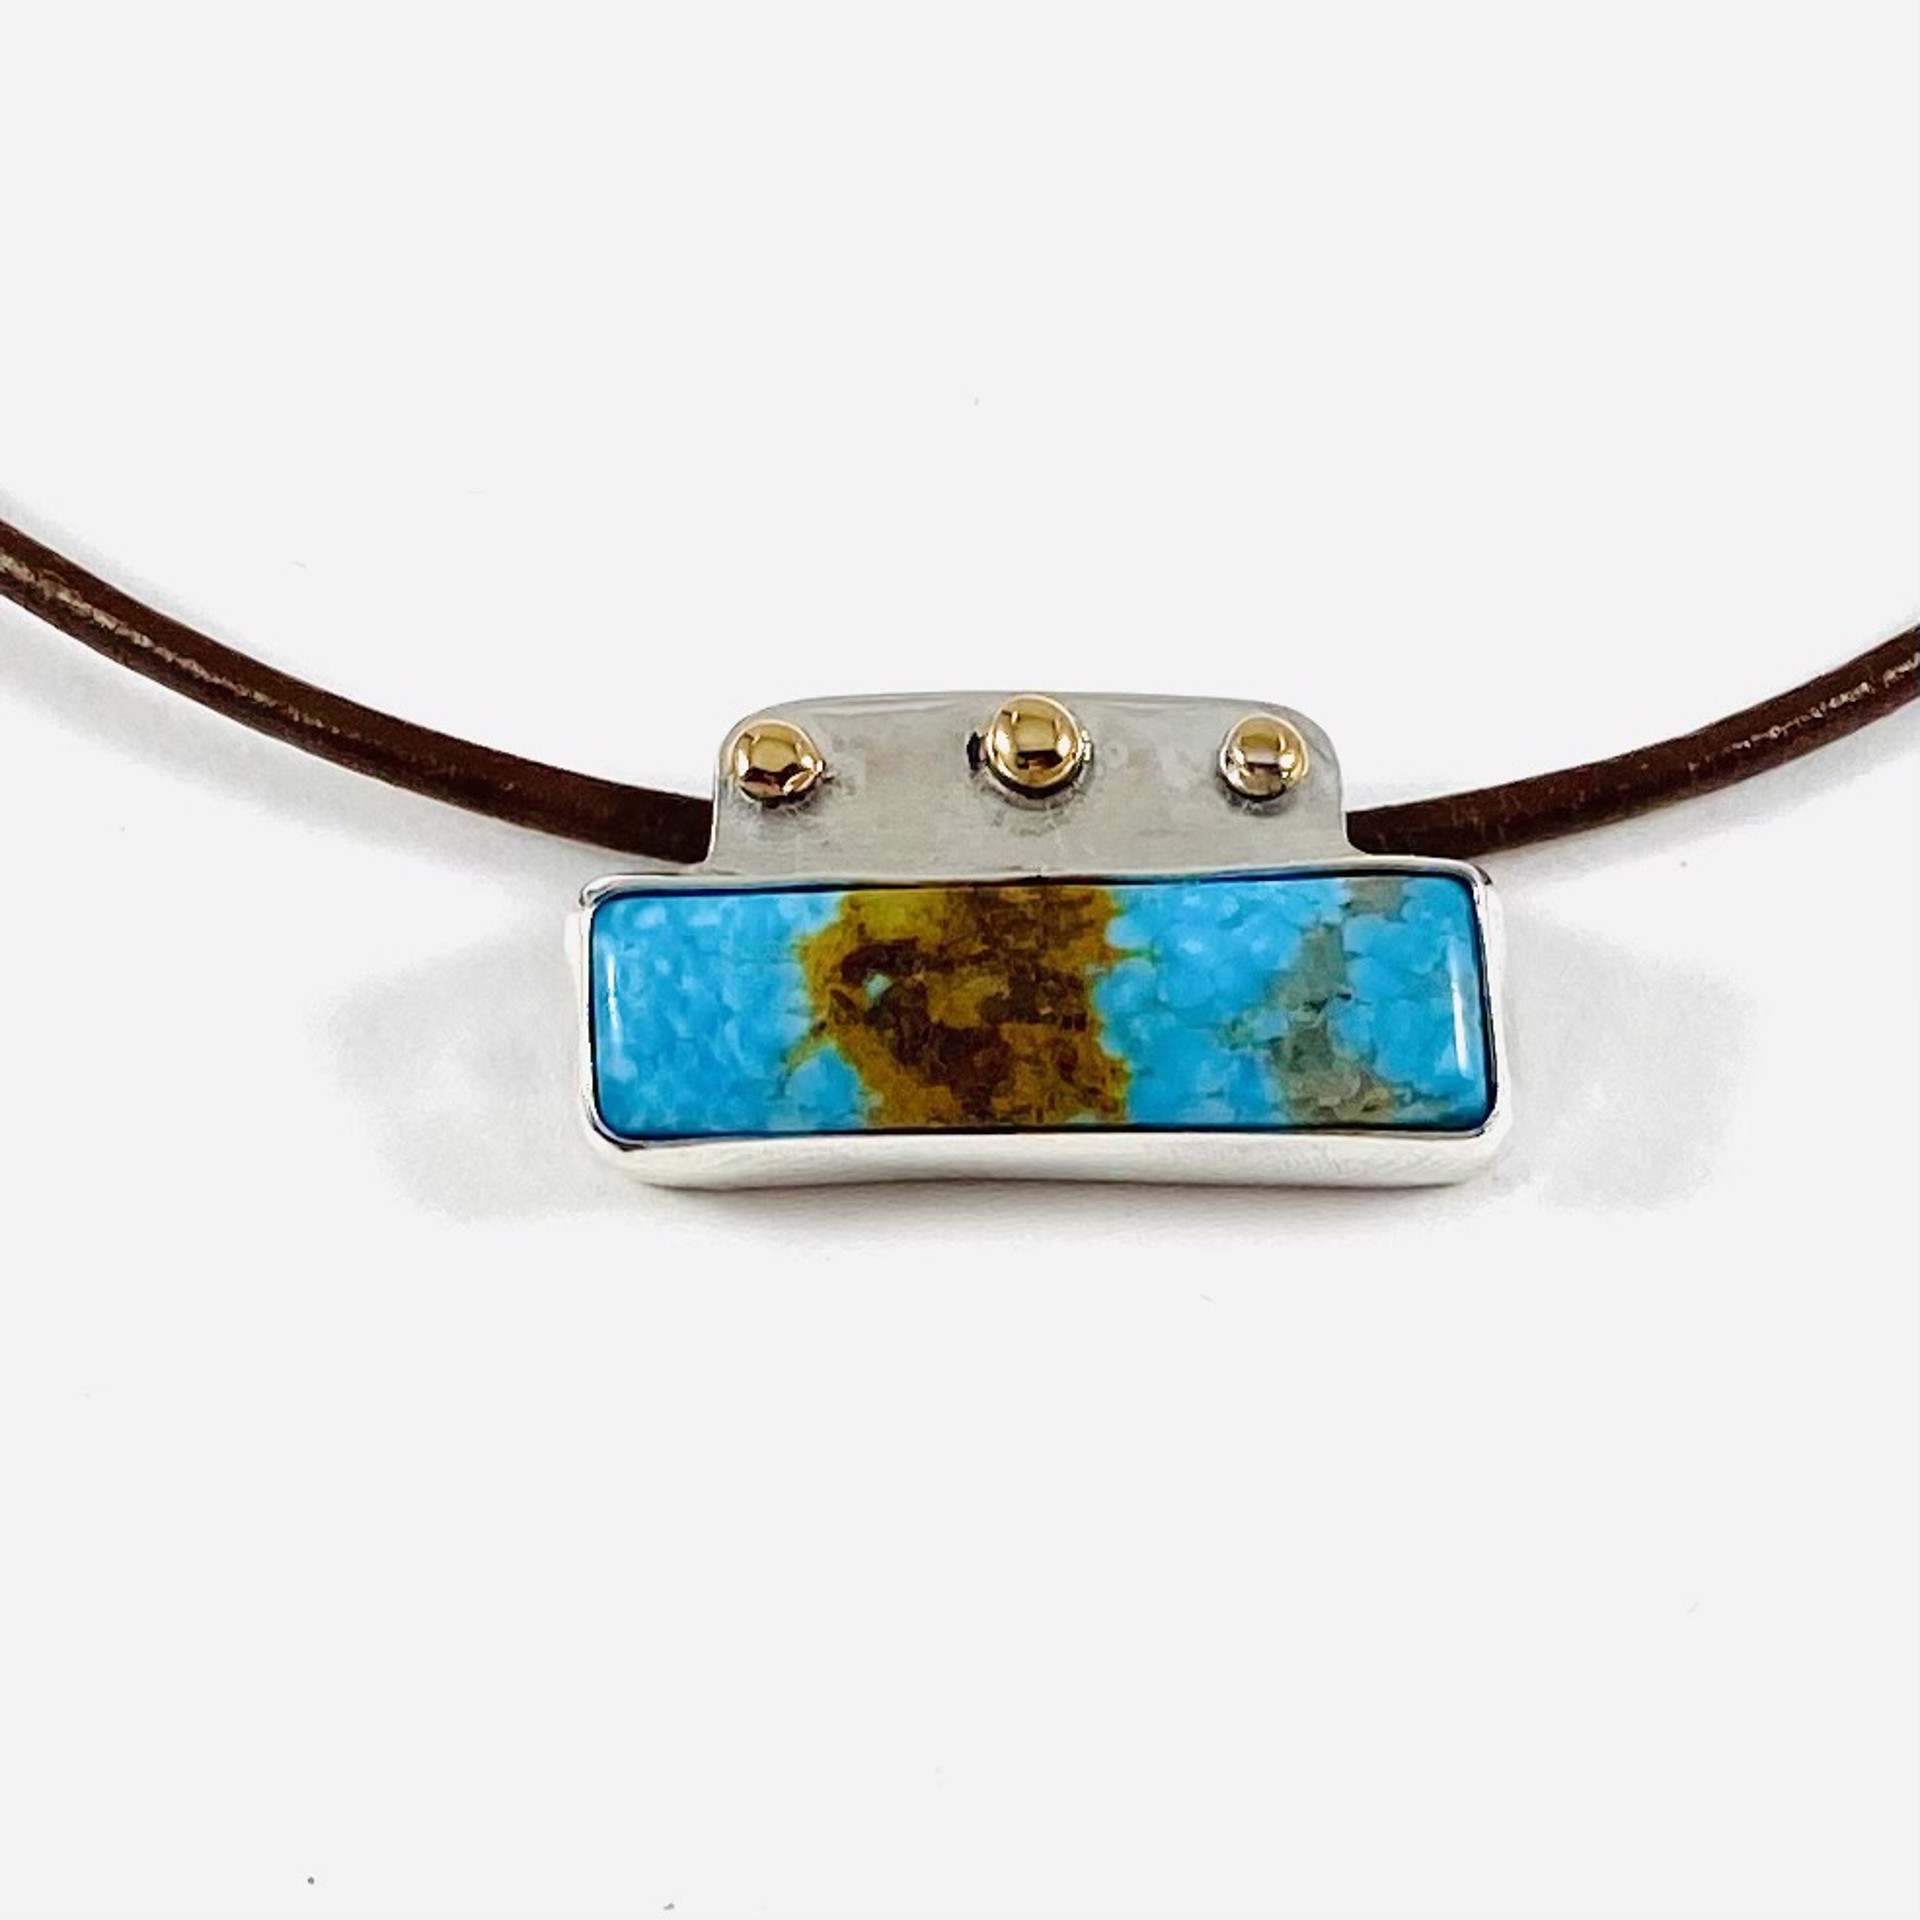 AB21-3 Kingsman Turquoise and Bronze, Silver Pendant on Leather Necklace by Anne Bivens